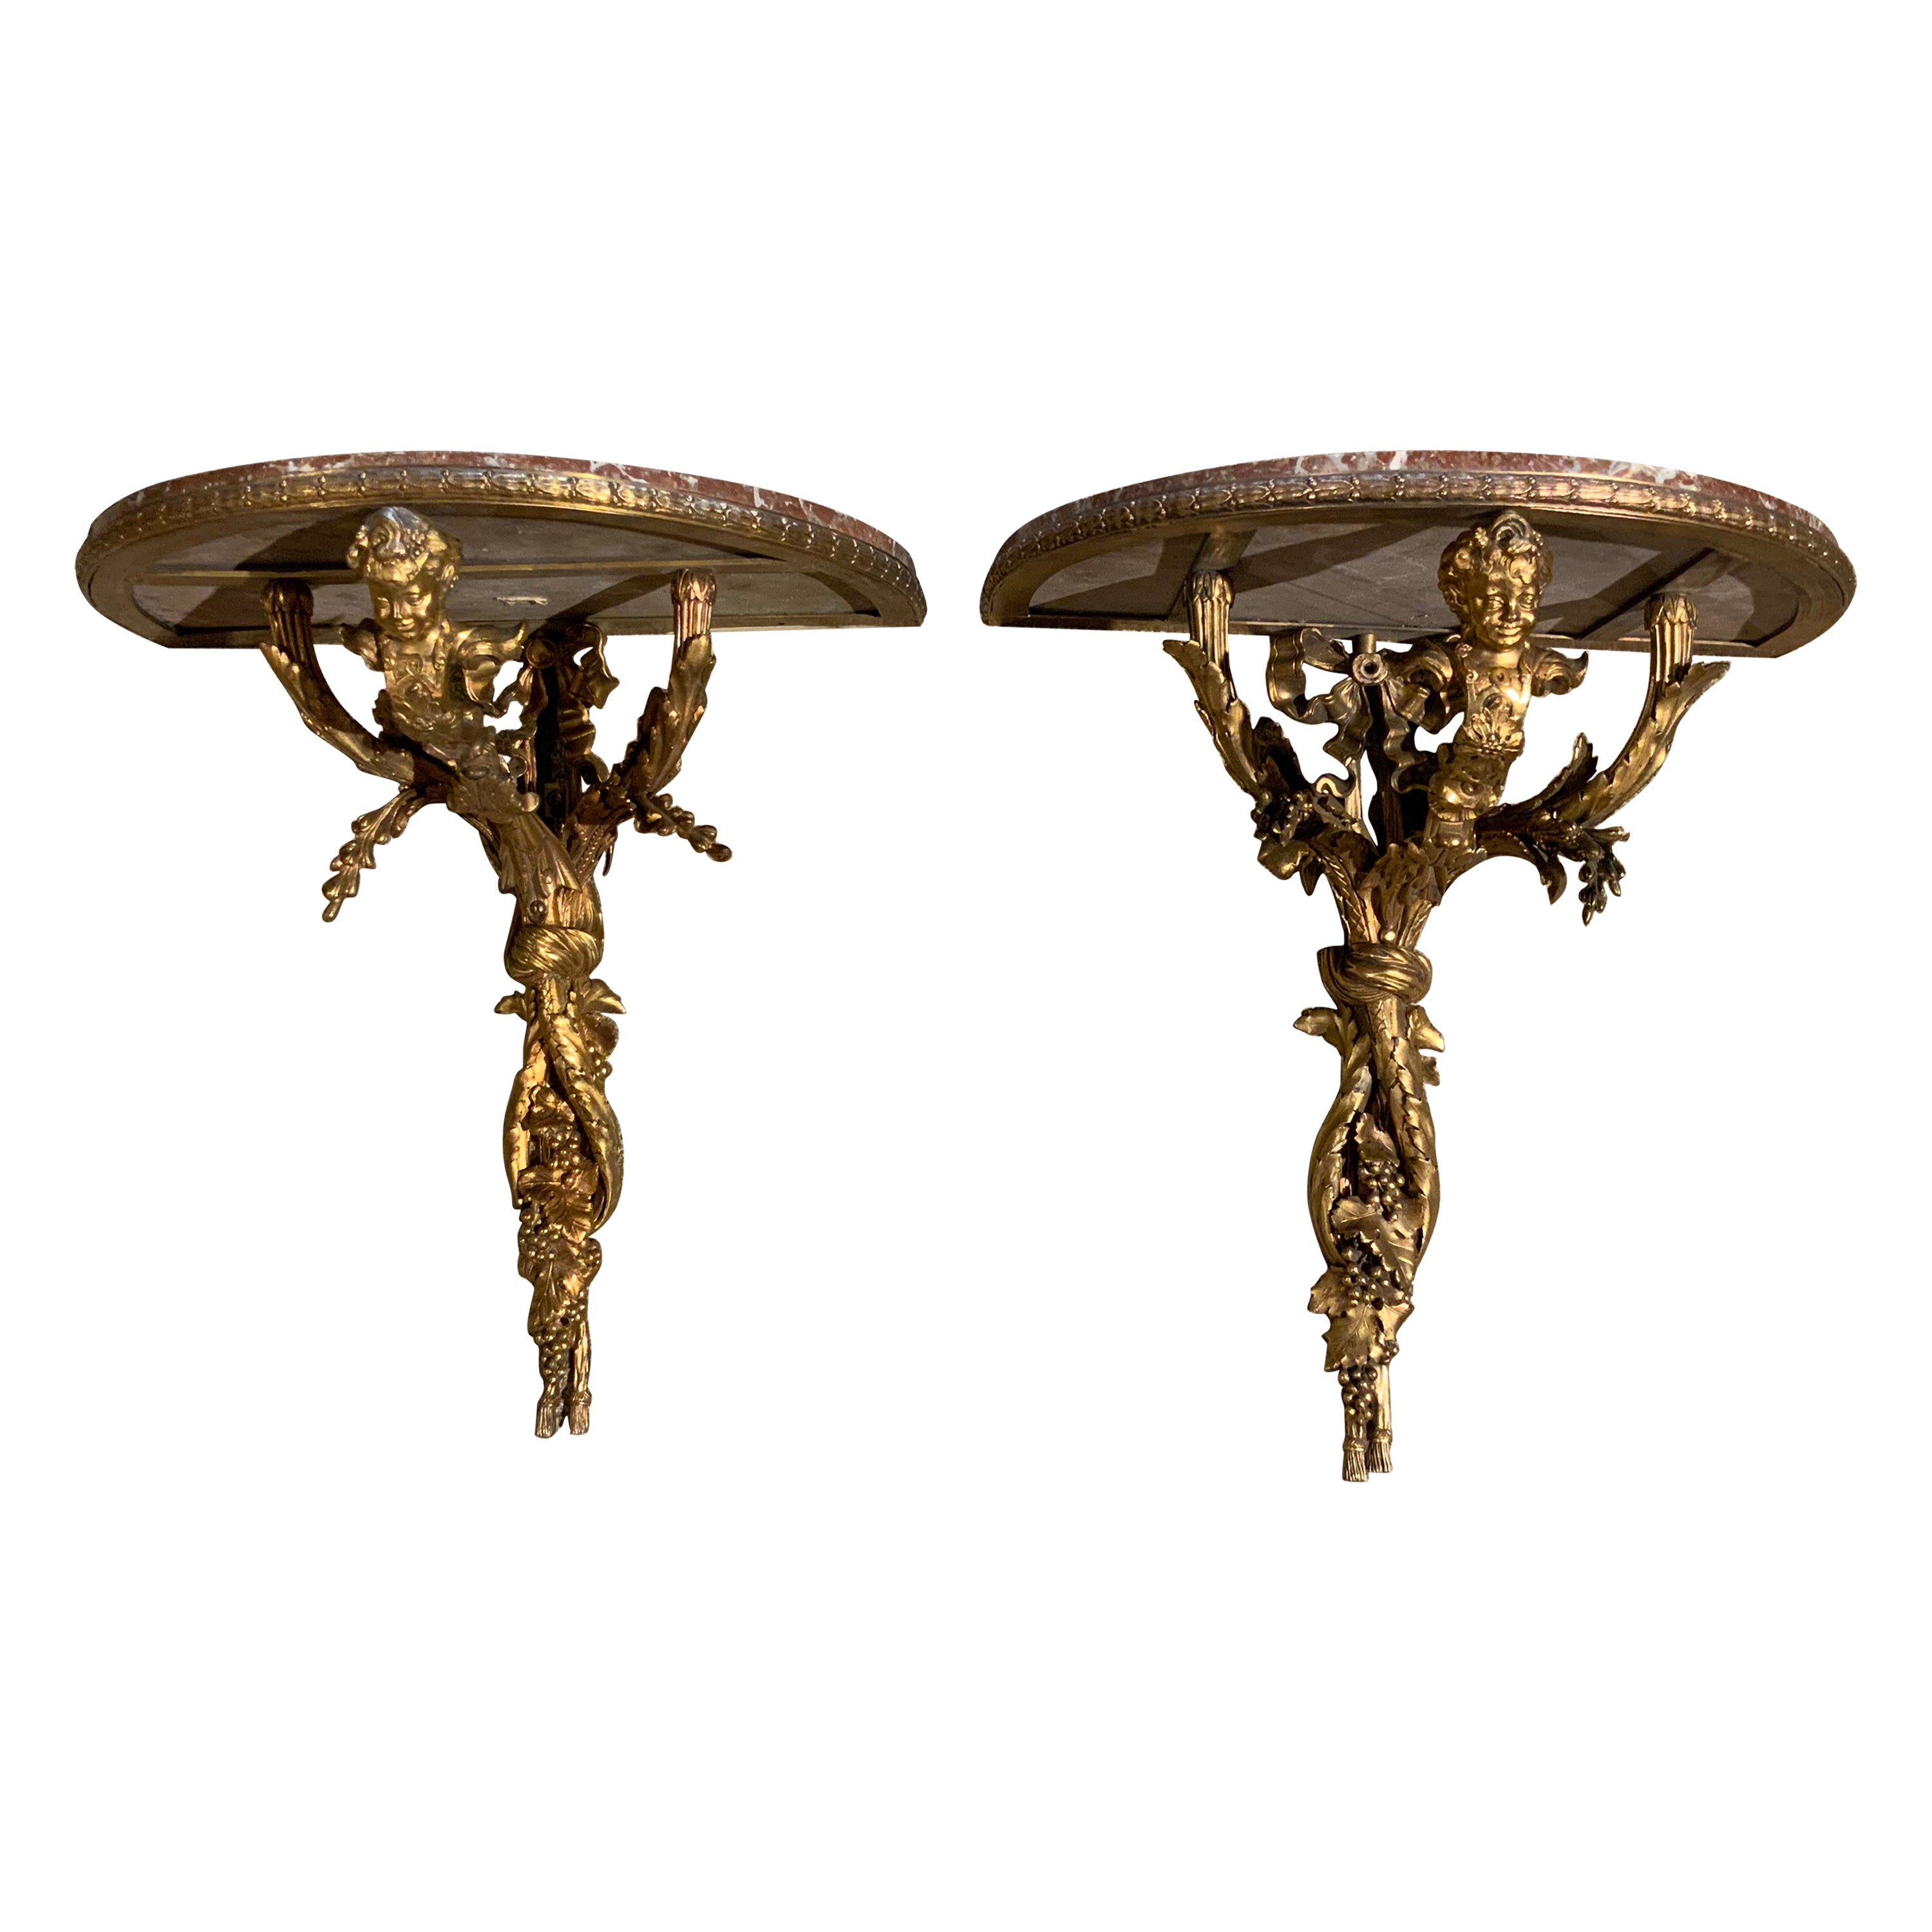 Pair of French 19th C. Bronze Dore and Rouge Marble Wall Brackets with Cherubs